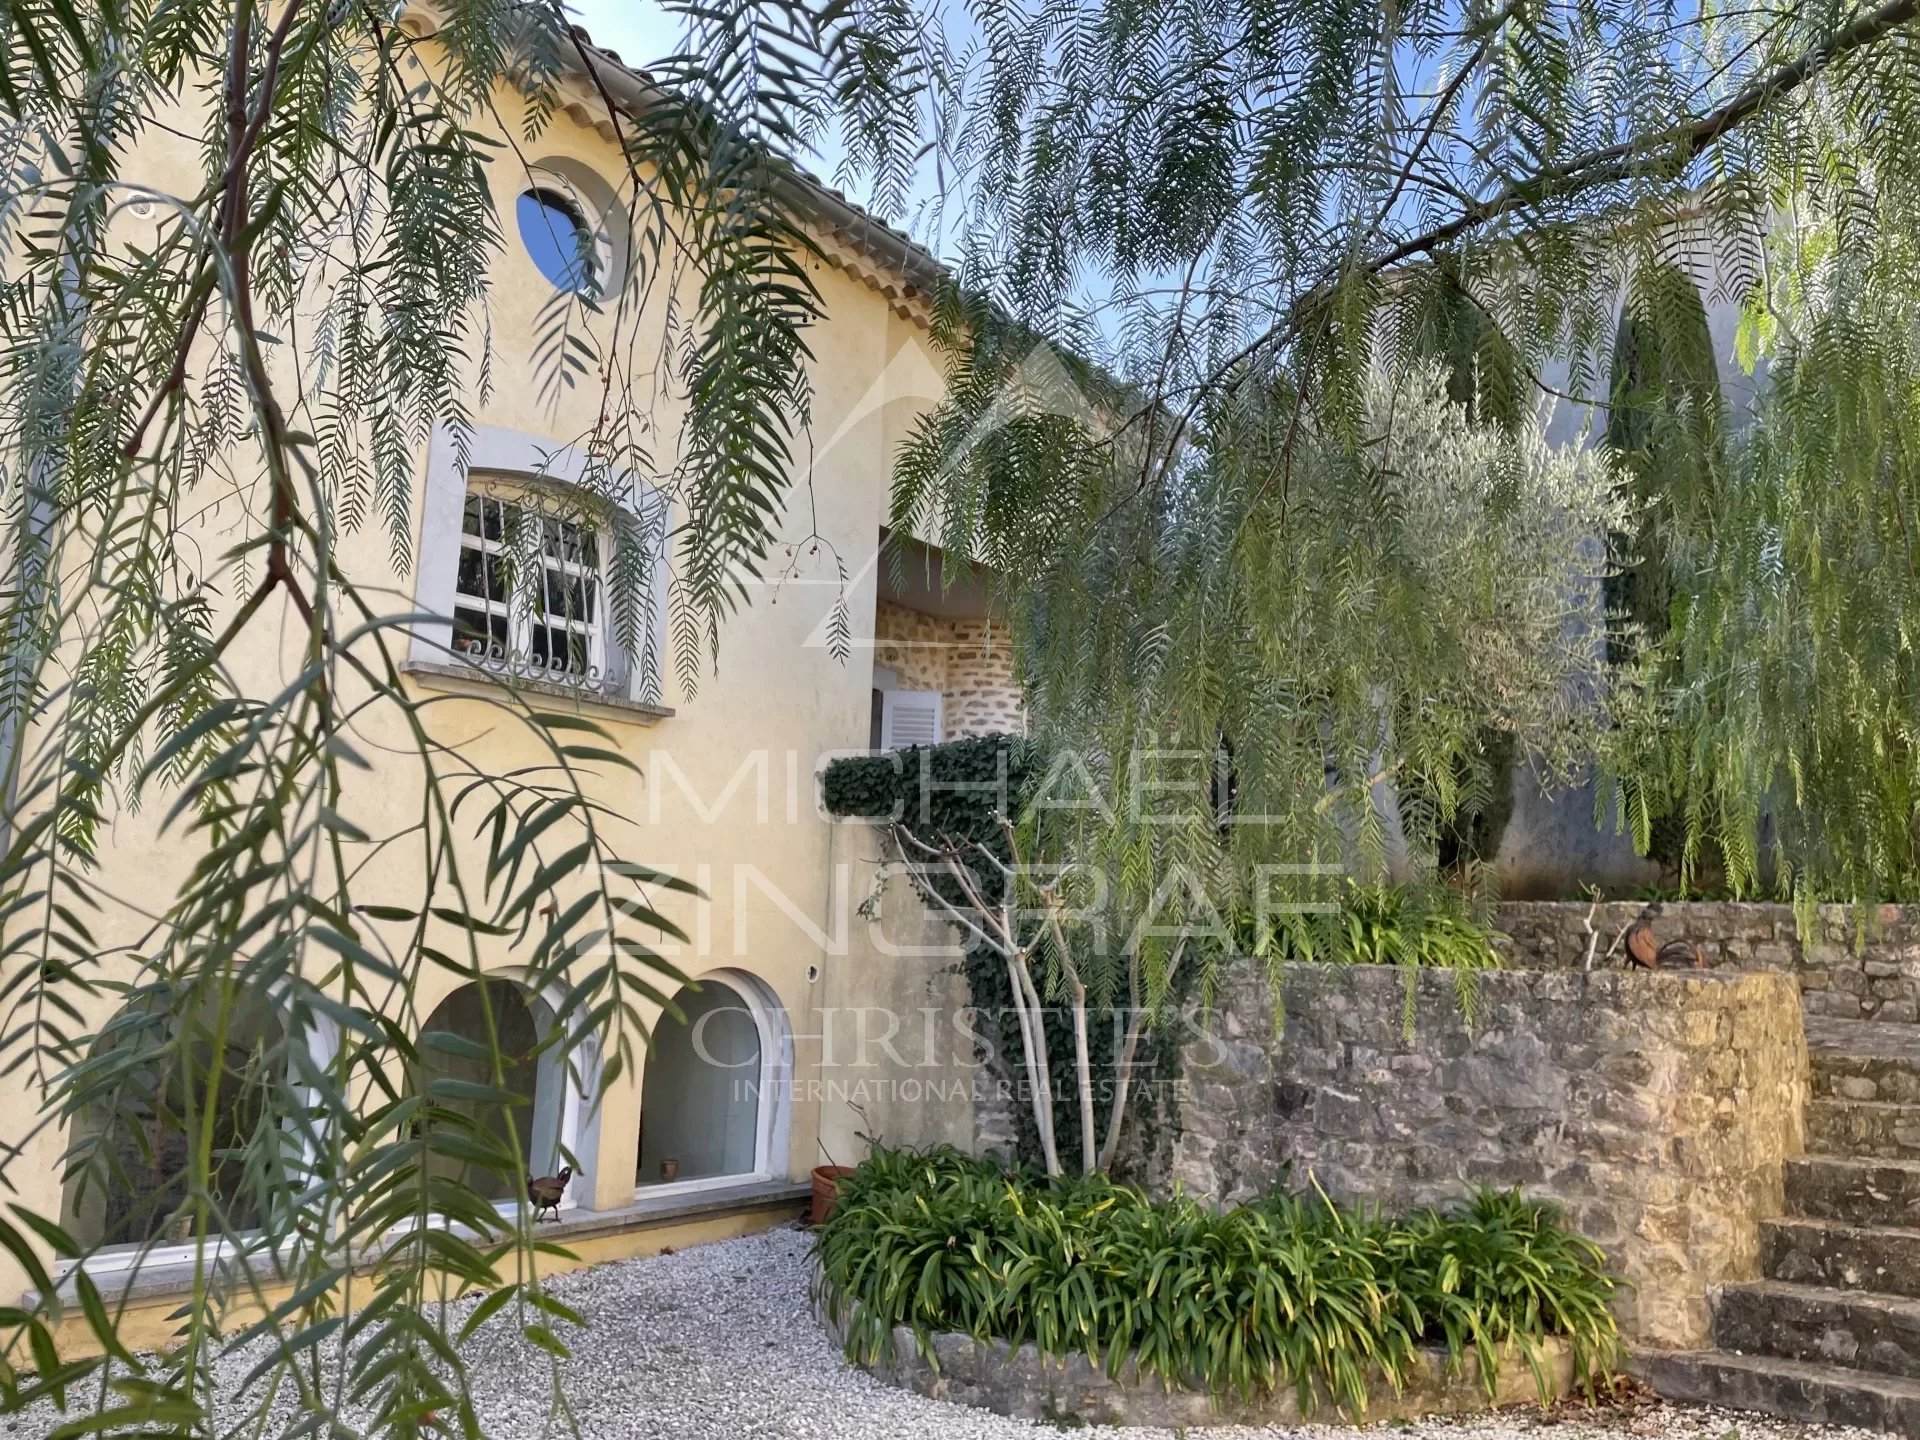 CHARMING BASTIDE IN THE HEART OF THE CÔTES DE PROVENCE AREA